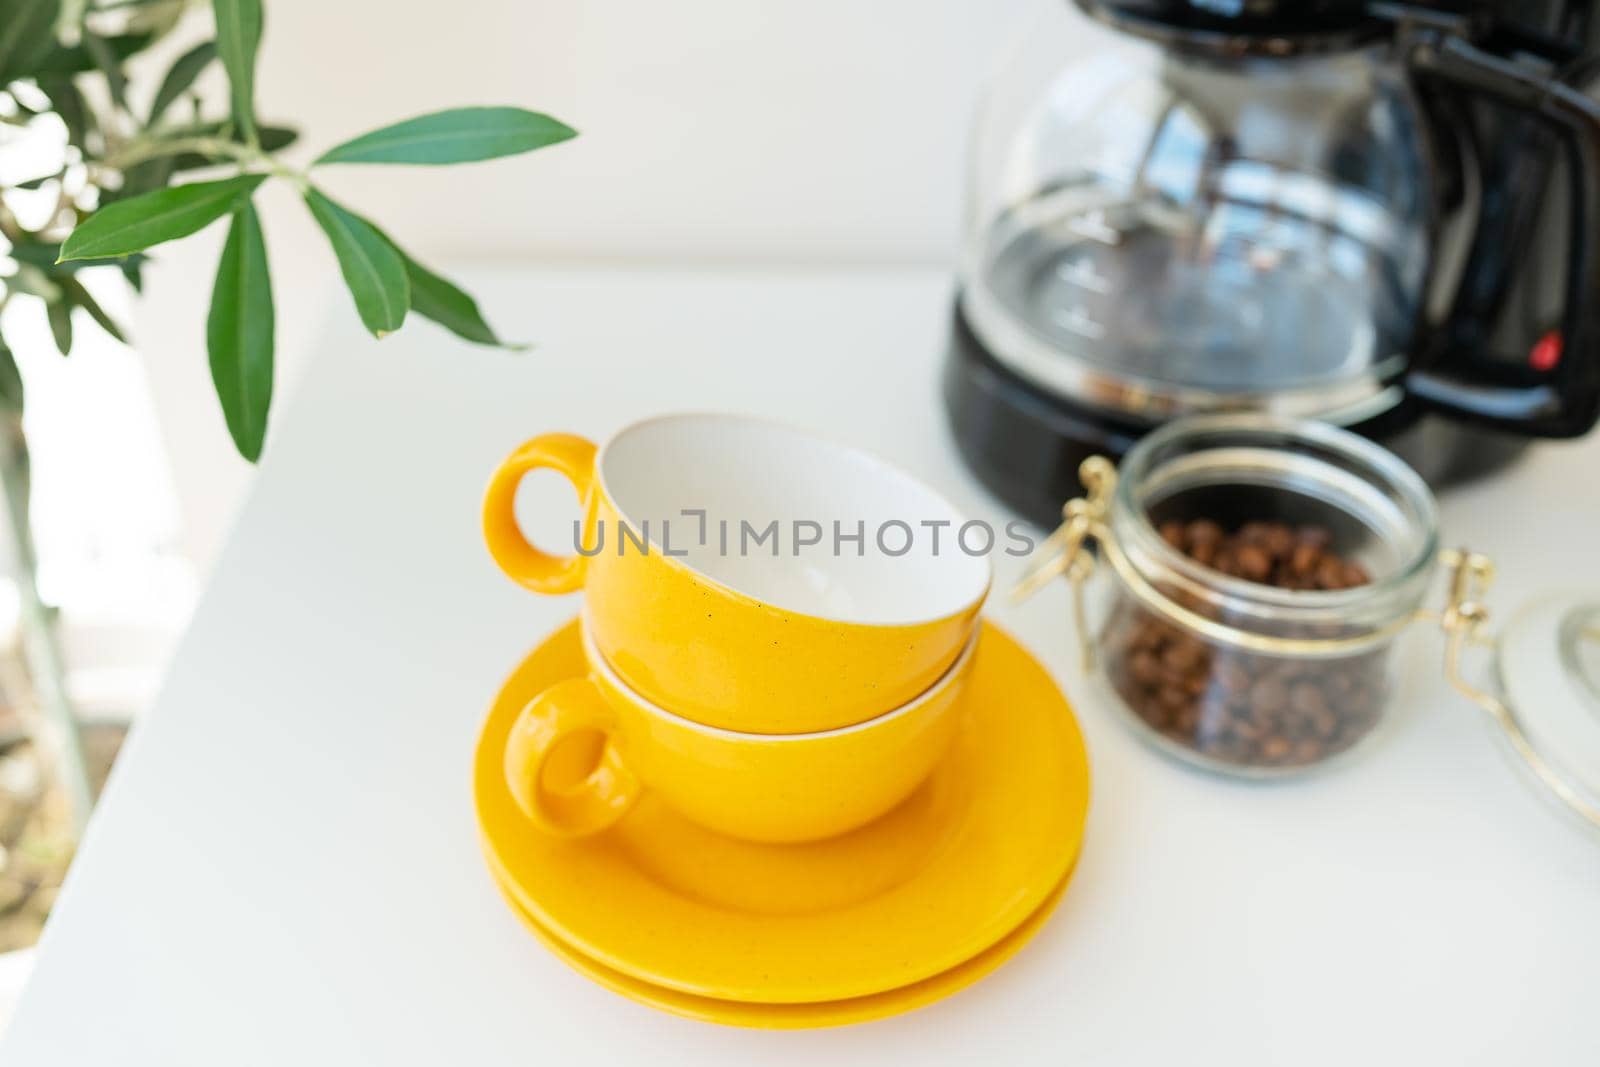 Beautiful morning, the process of making coffee. An automatic drip coffee maker stands with a yellow cup on a white table. Electric kitchen small household appliances